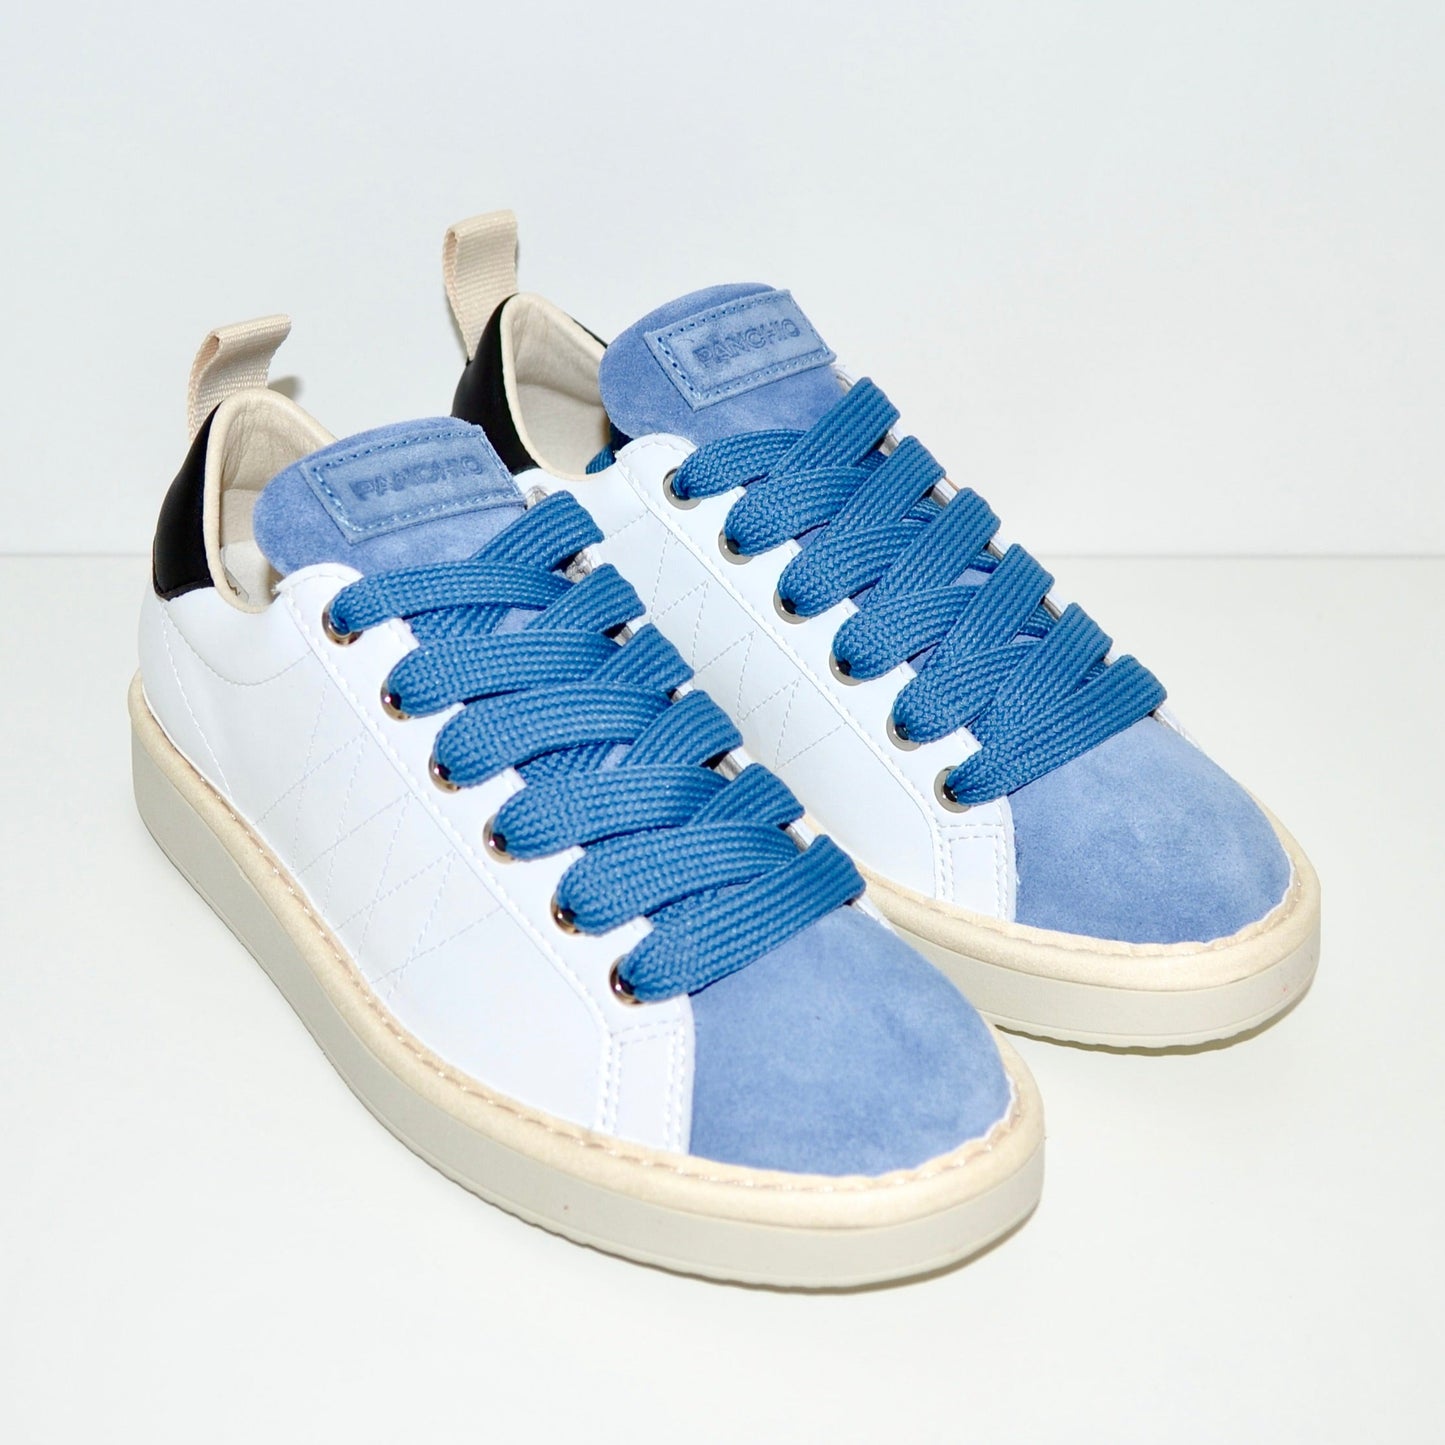 Sneakers Panchic woman white leather and blue suede